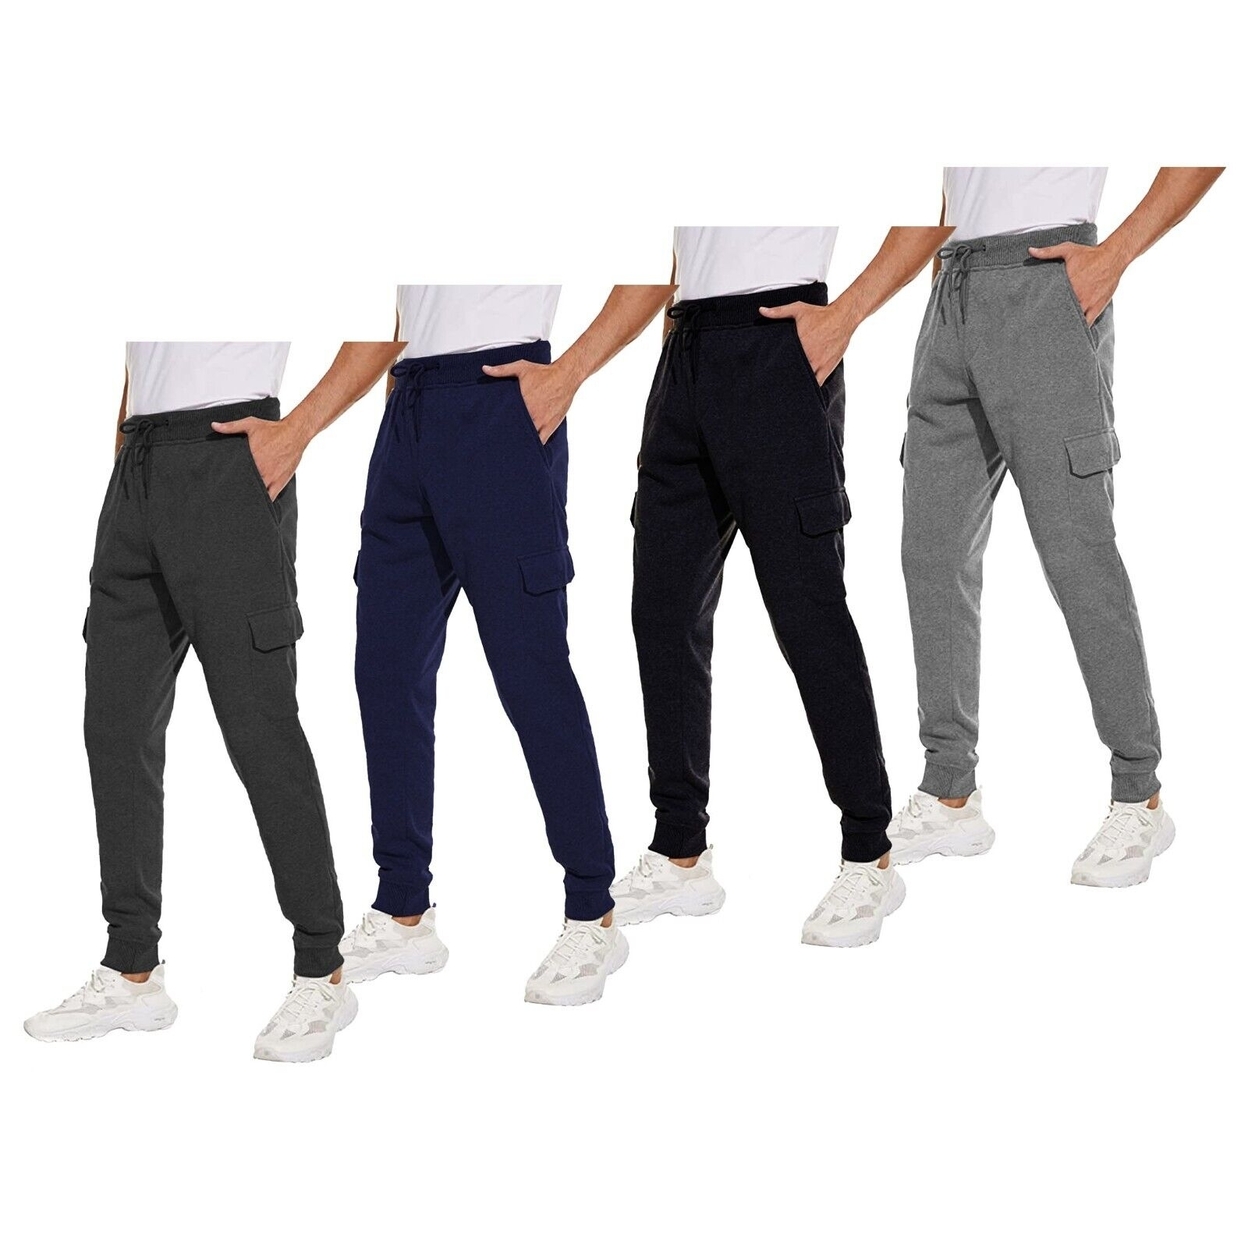 3-Pack Men's Ultra Soft Winter Warm Thick Athletic Sherpa Lined Jogger Pants - Assorted, 3xl